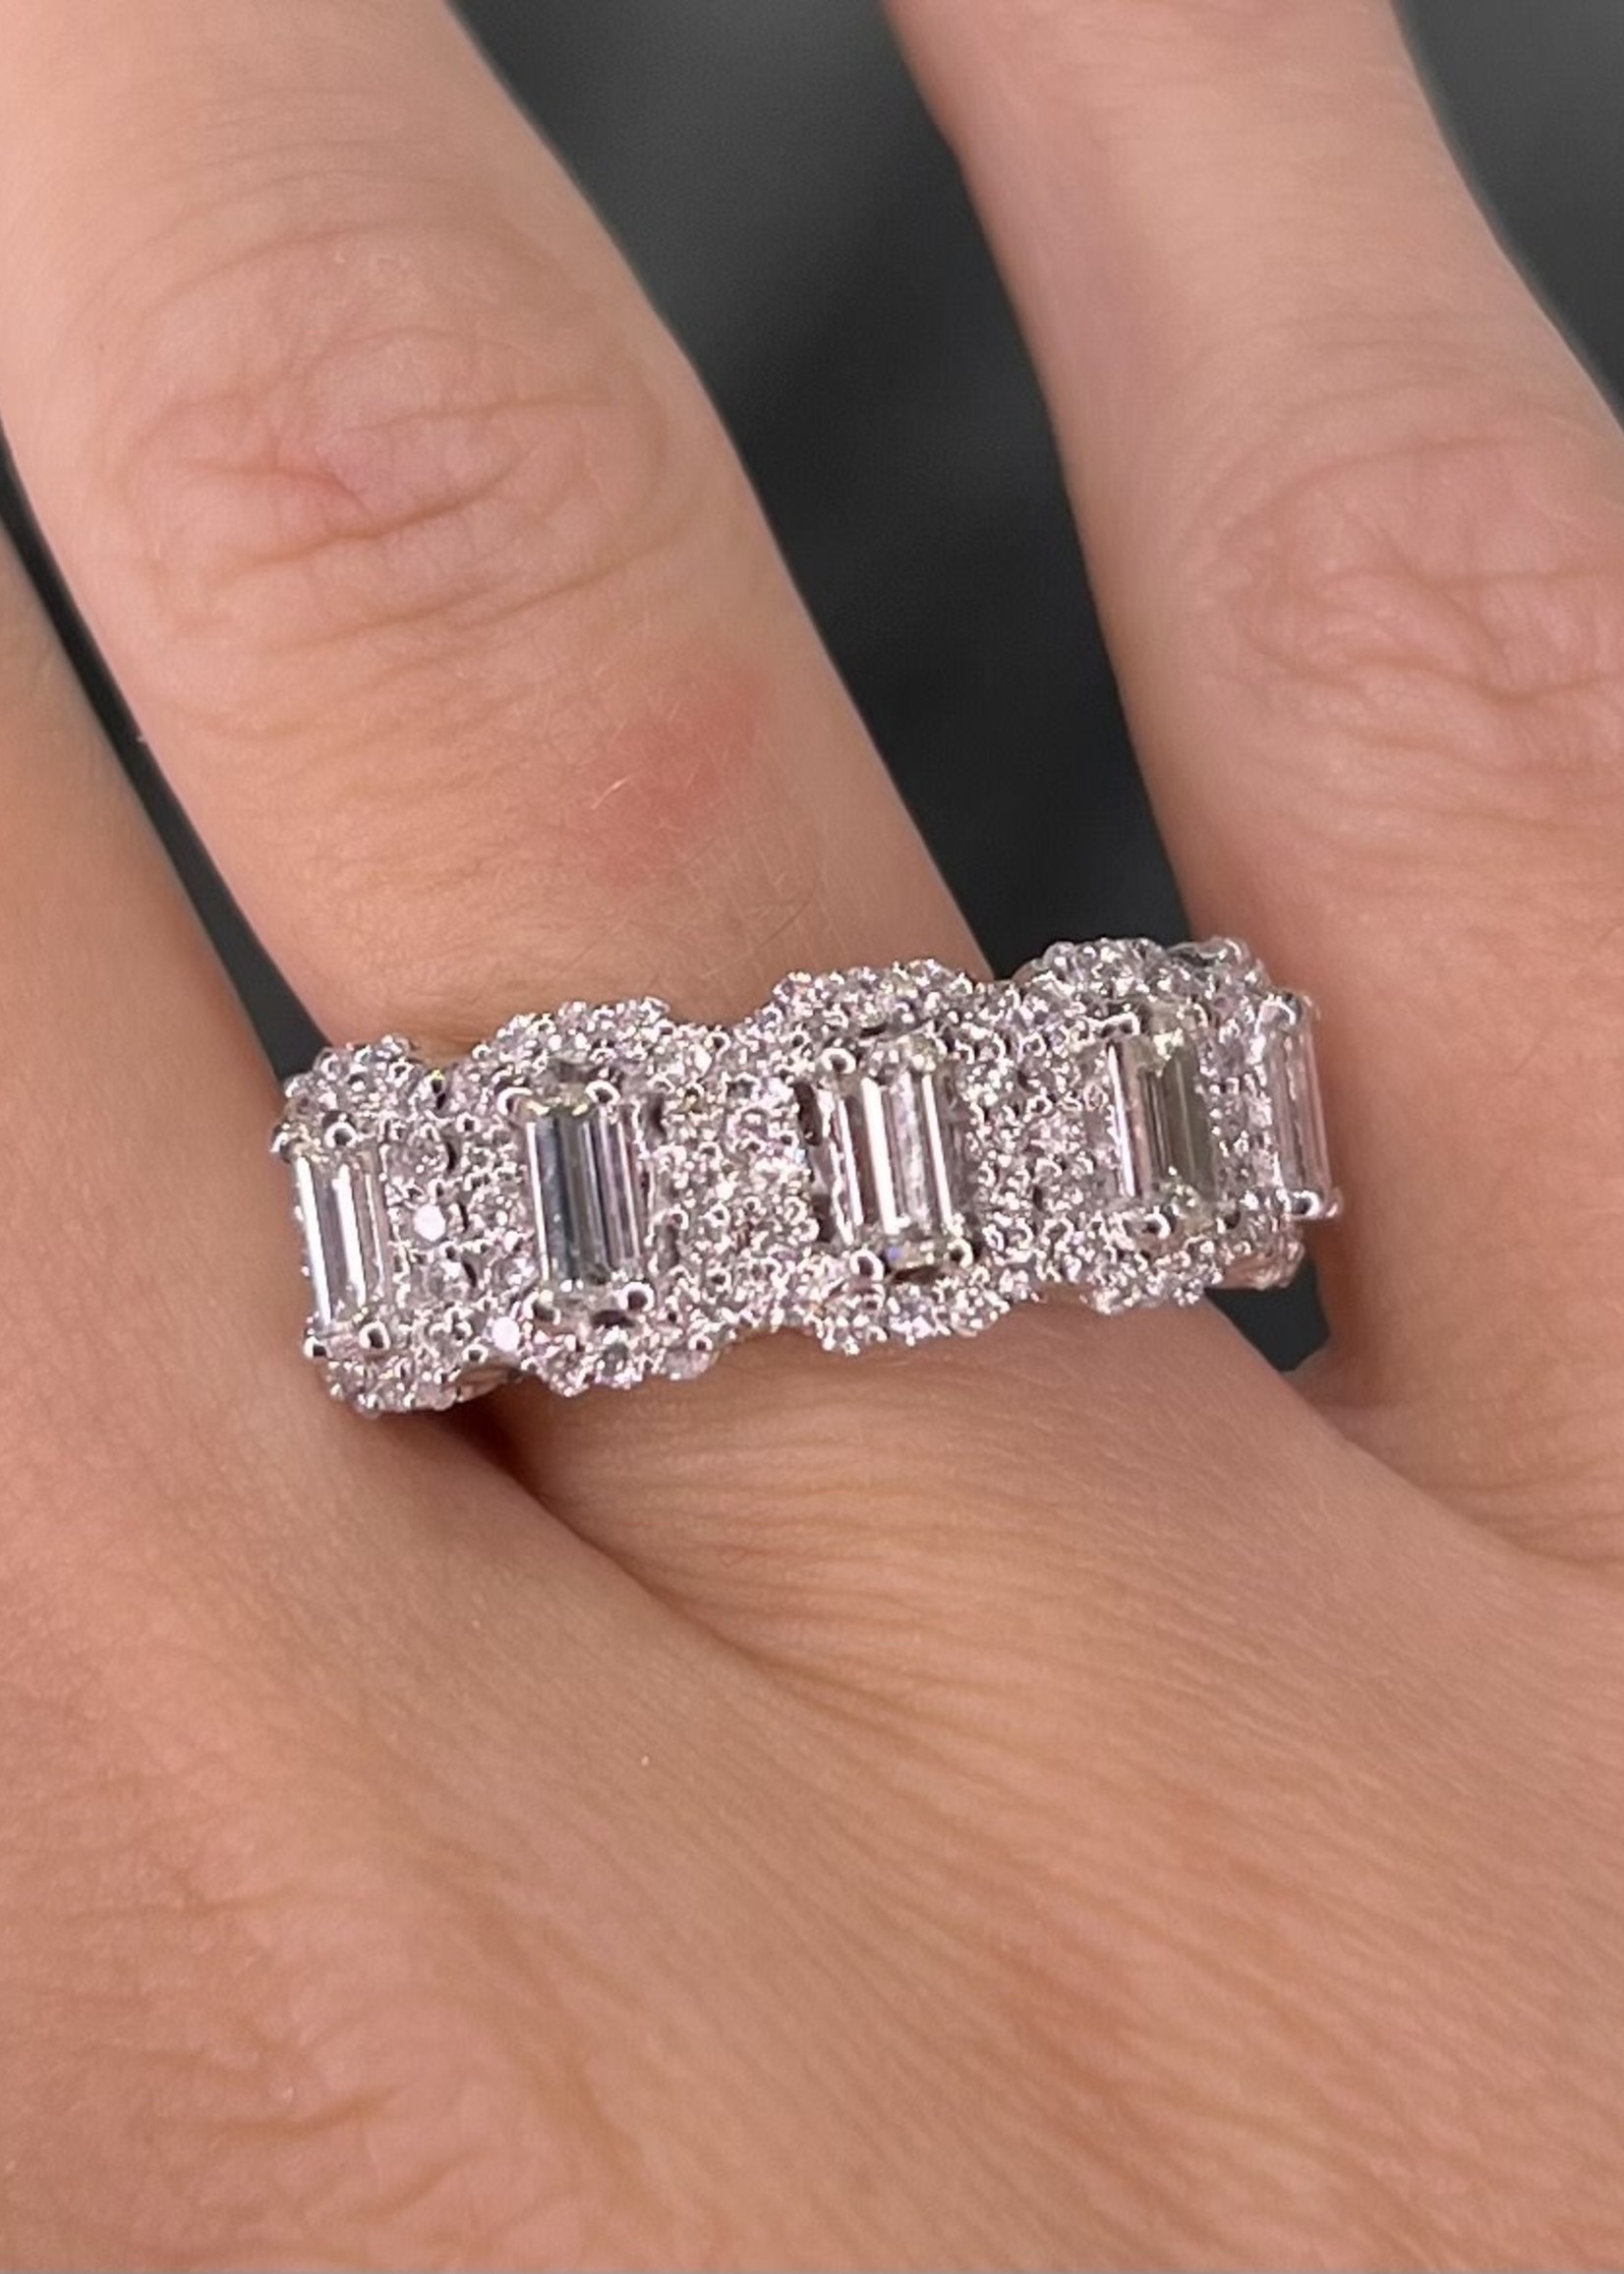 14kW 2ctw Baguette and Round Diamond Band. As Loved on Instagram!